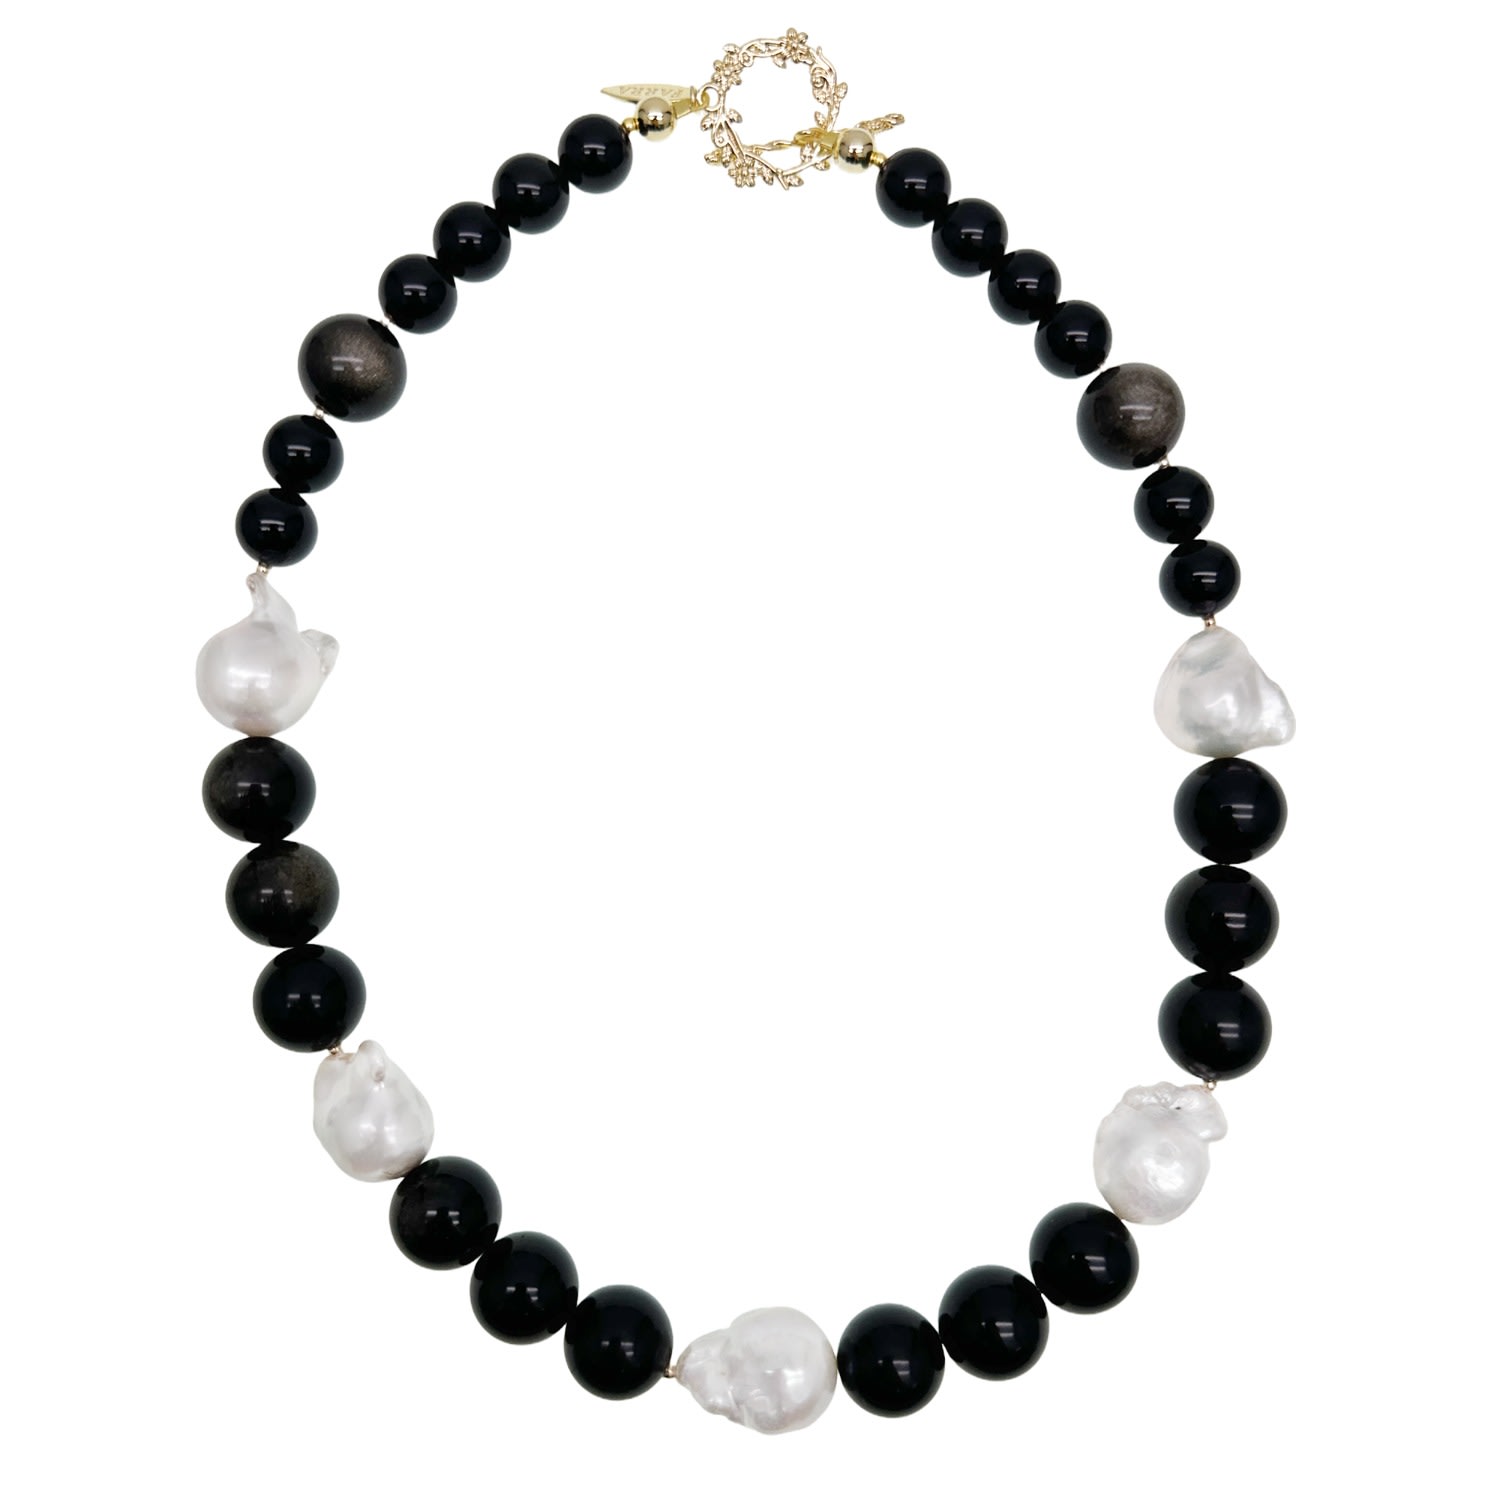 Farra Women's Black / White Timeless Nugget Black Obsidian With Baroque Pearls Chunky Necklace